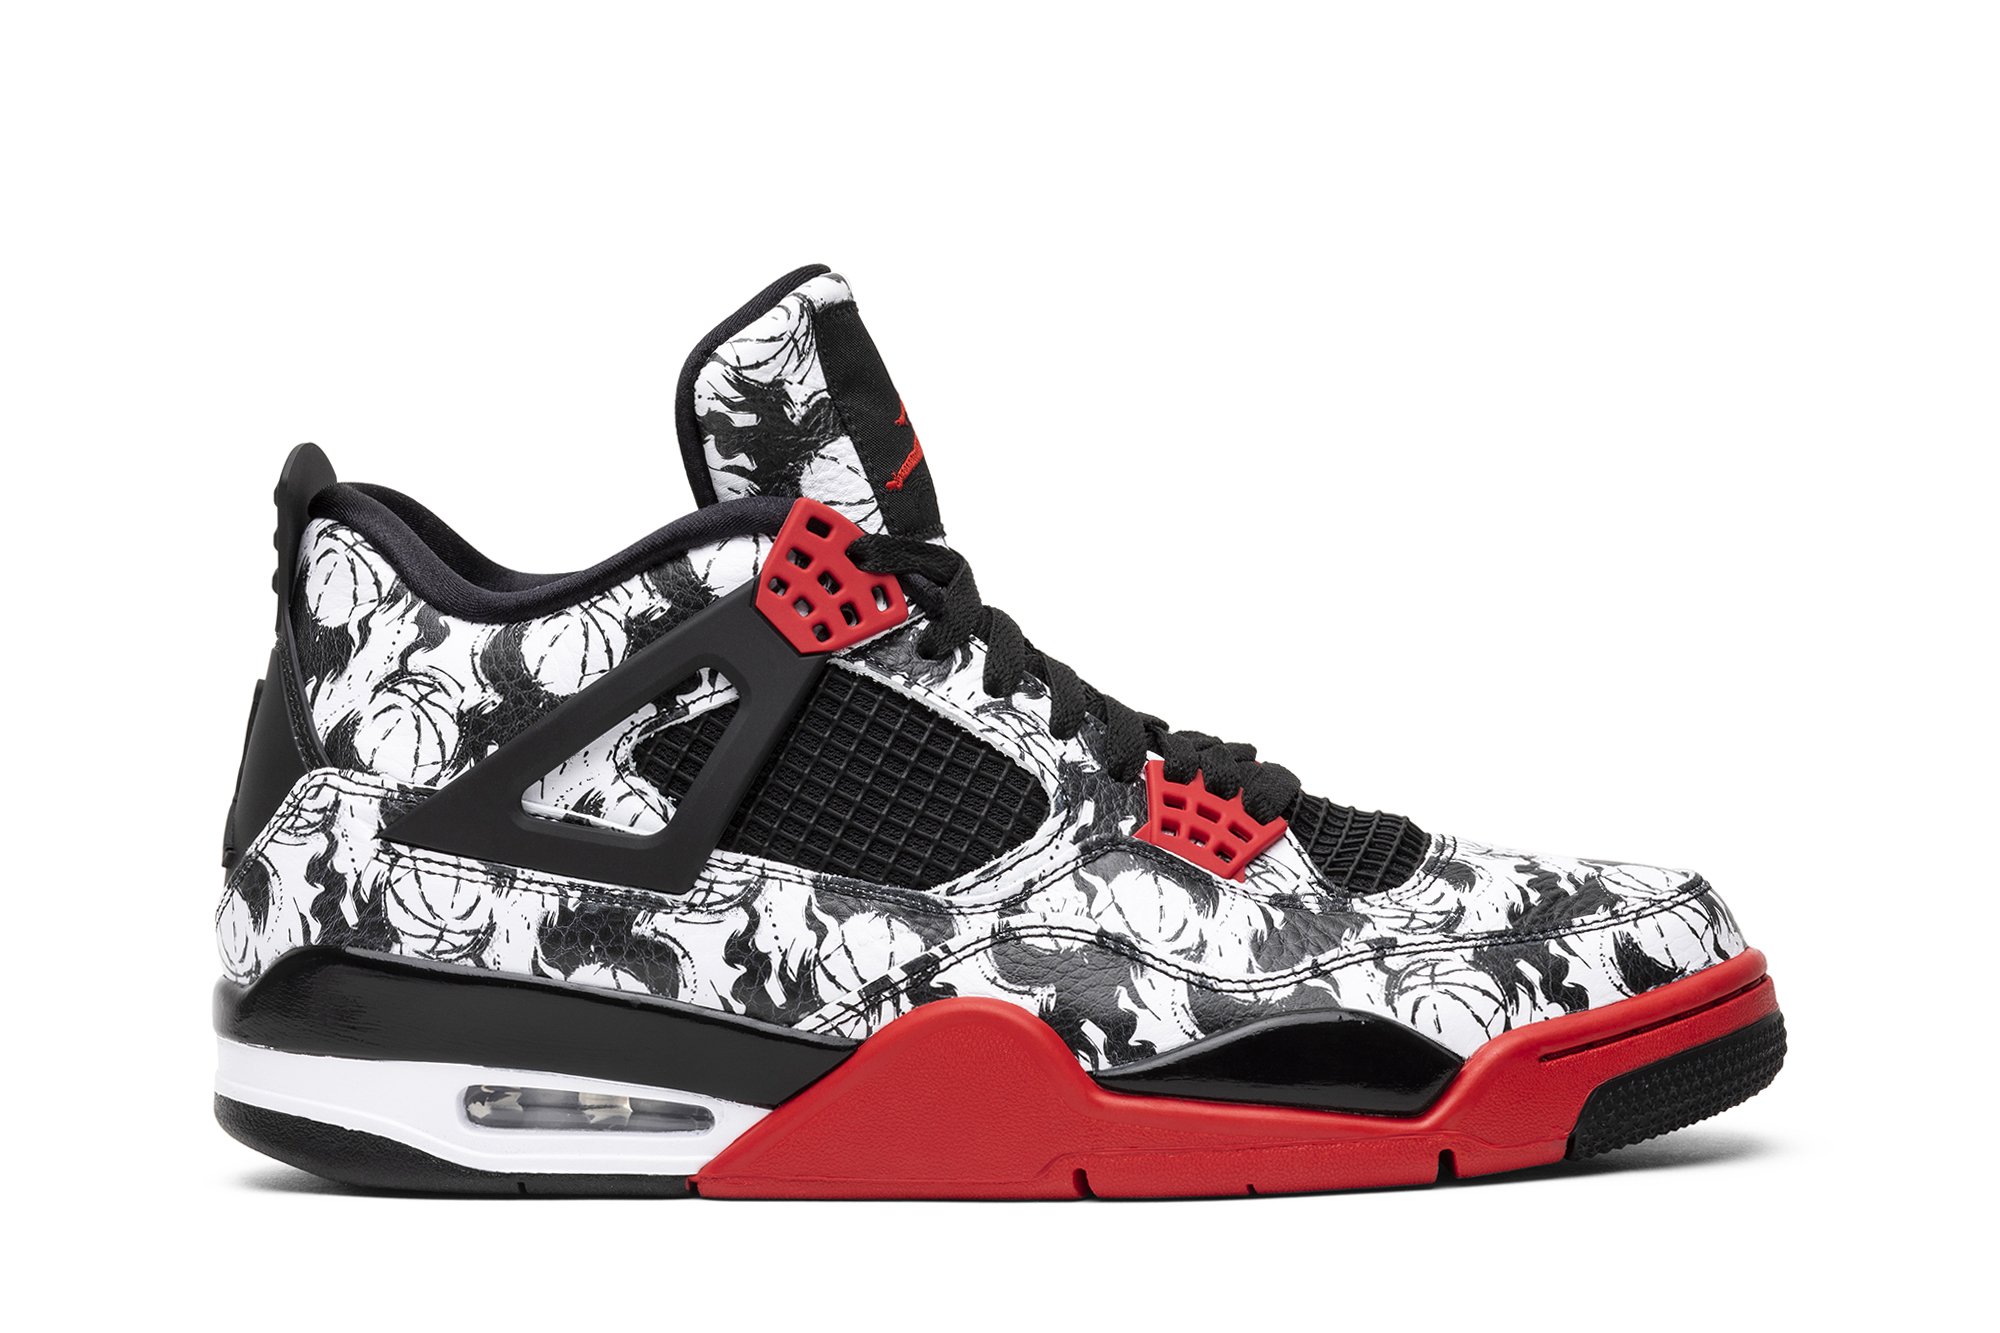 ET Special Cloth on Twitter Air Jordan 4 Tattoo Black Fire Red Black  White going at K36000 Size 75UK 85US httpstcoMyItupYCDg  Twitter